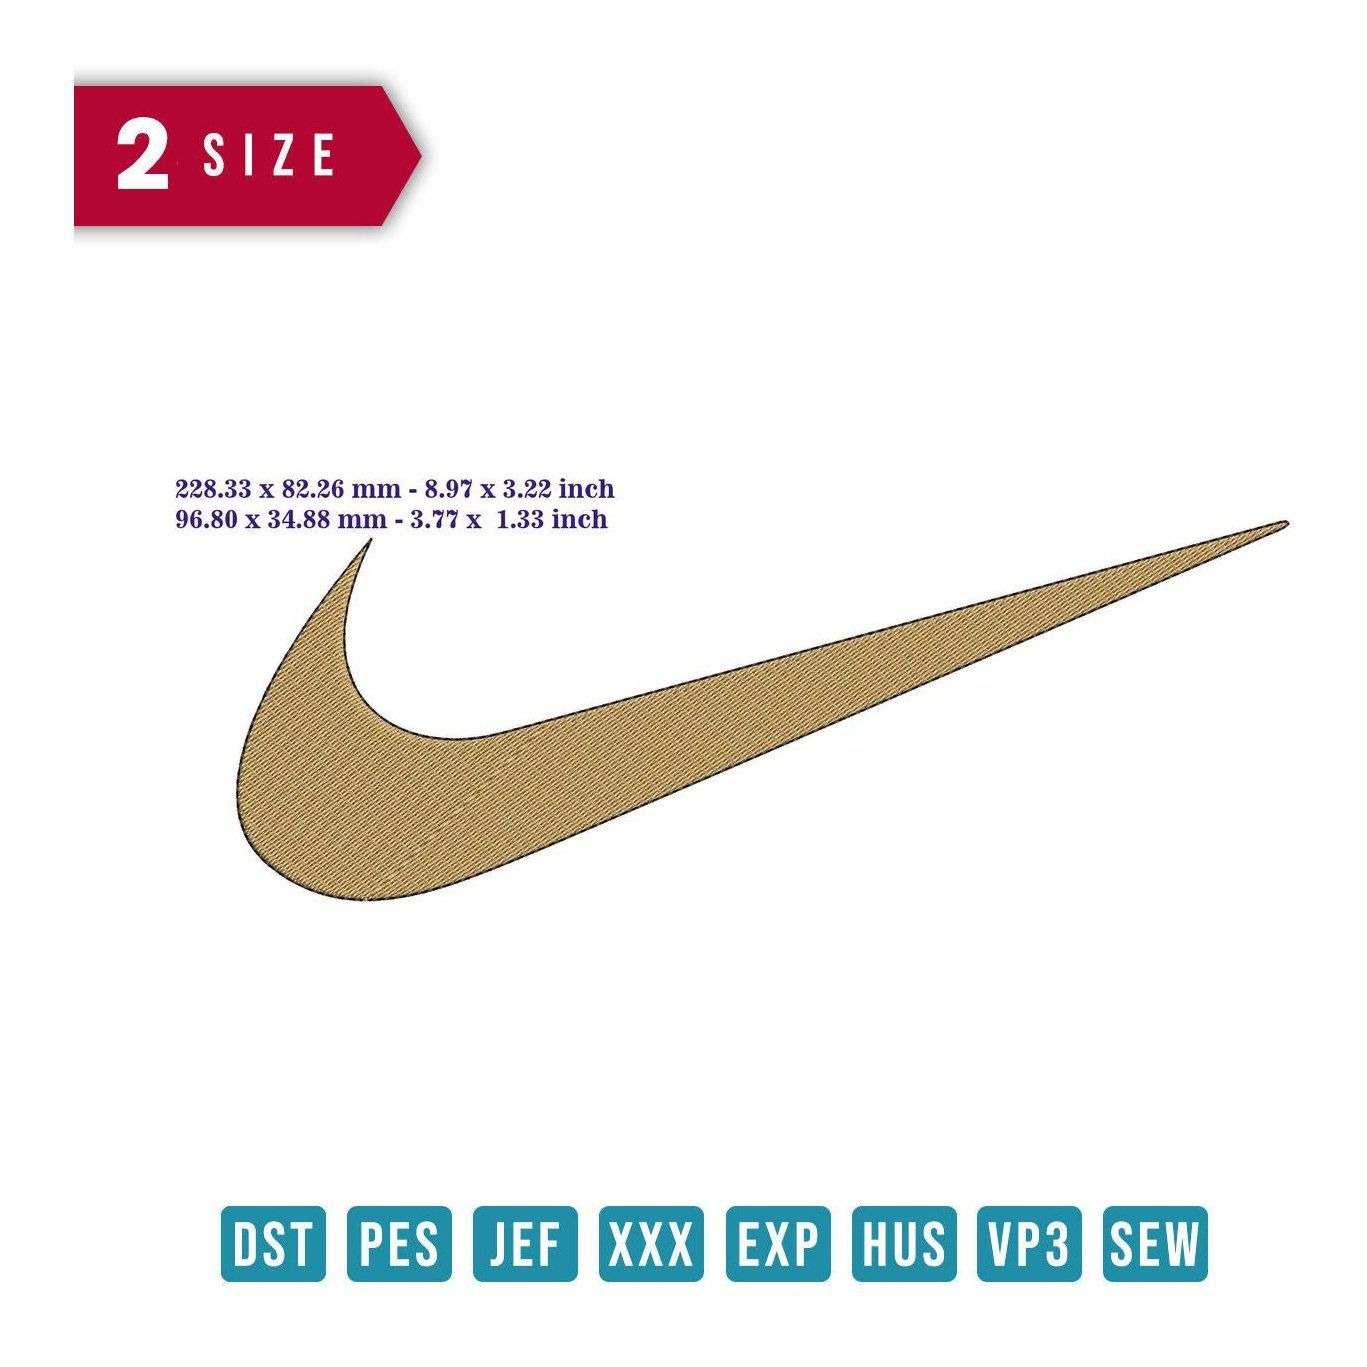 Nike gold logo - Embroidery Design - FineryEmbroidery